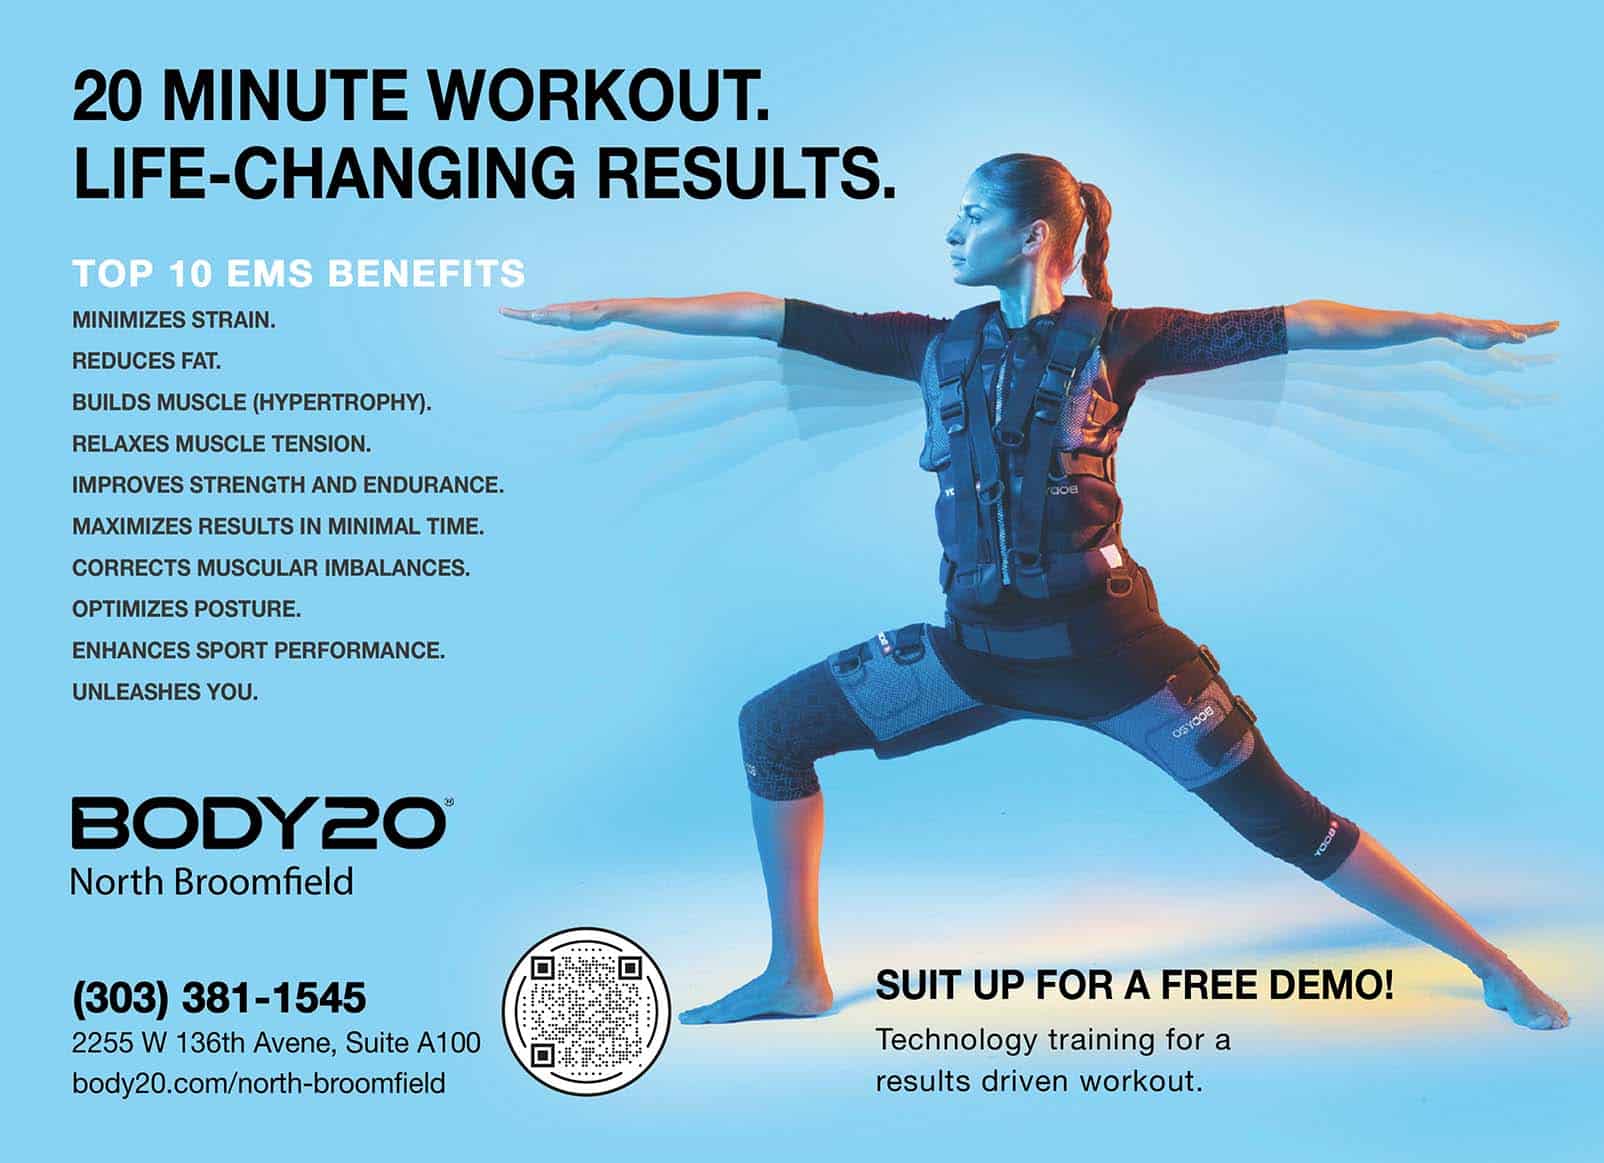 Body20: 20 minute workout. Life changing results. Suit up for a free demo